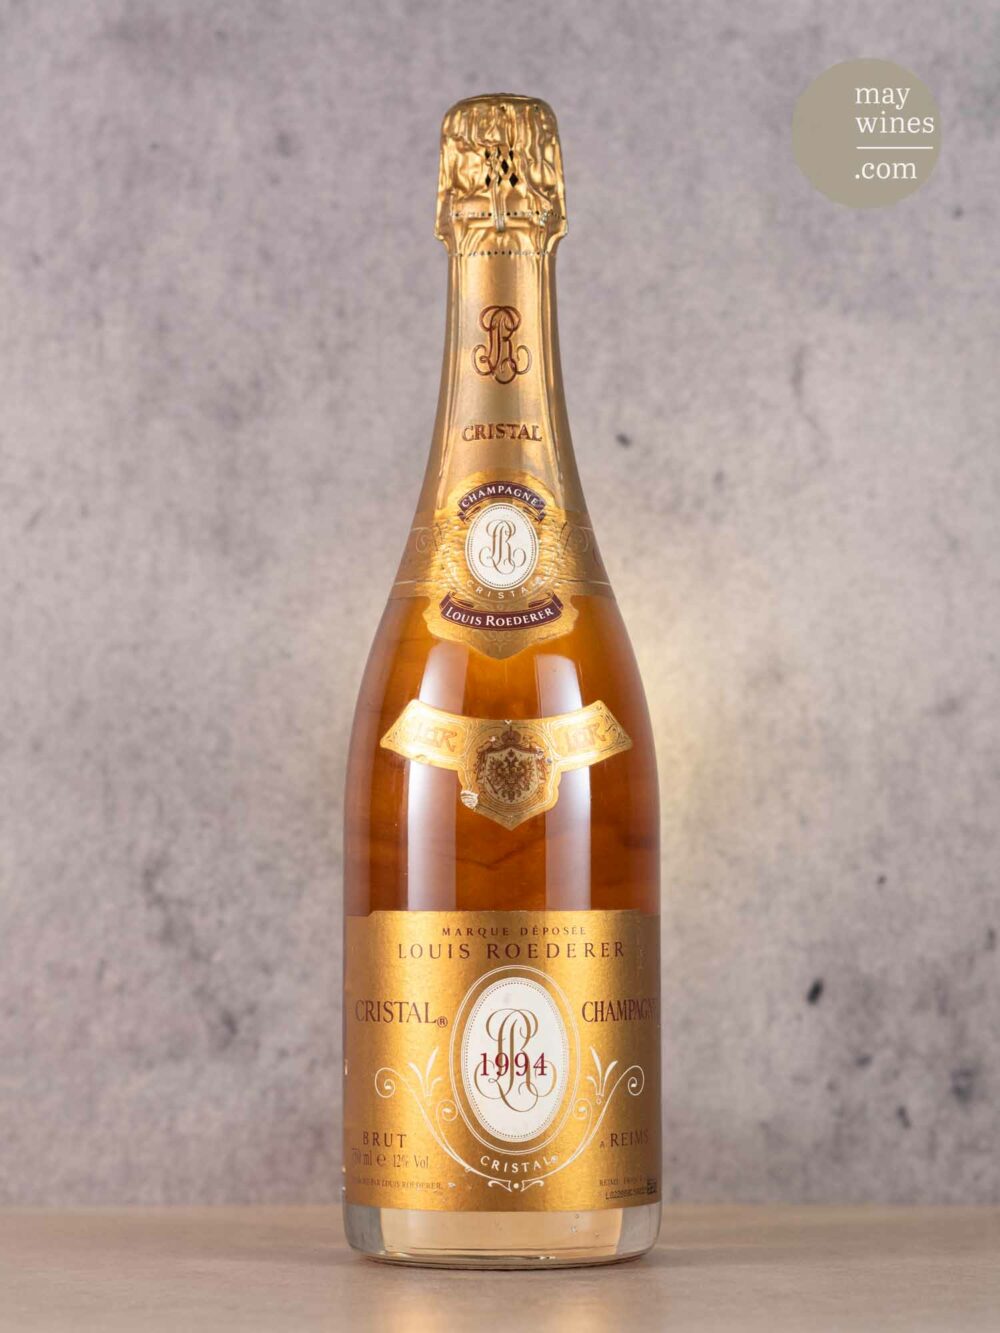 May Wines – Champagner – 1994 Cristal - Louis Roederer